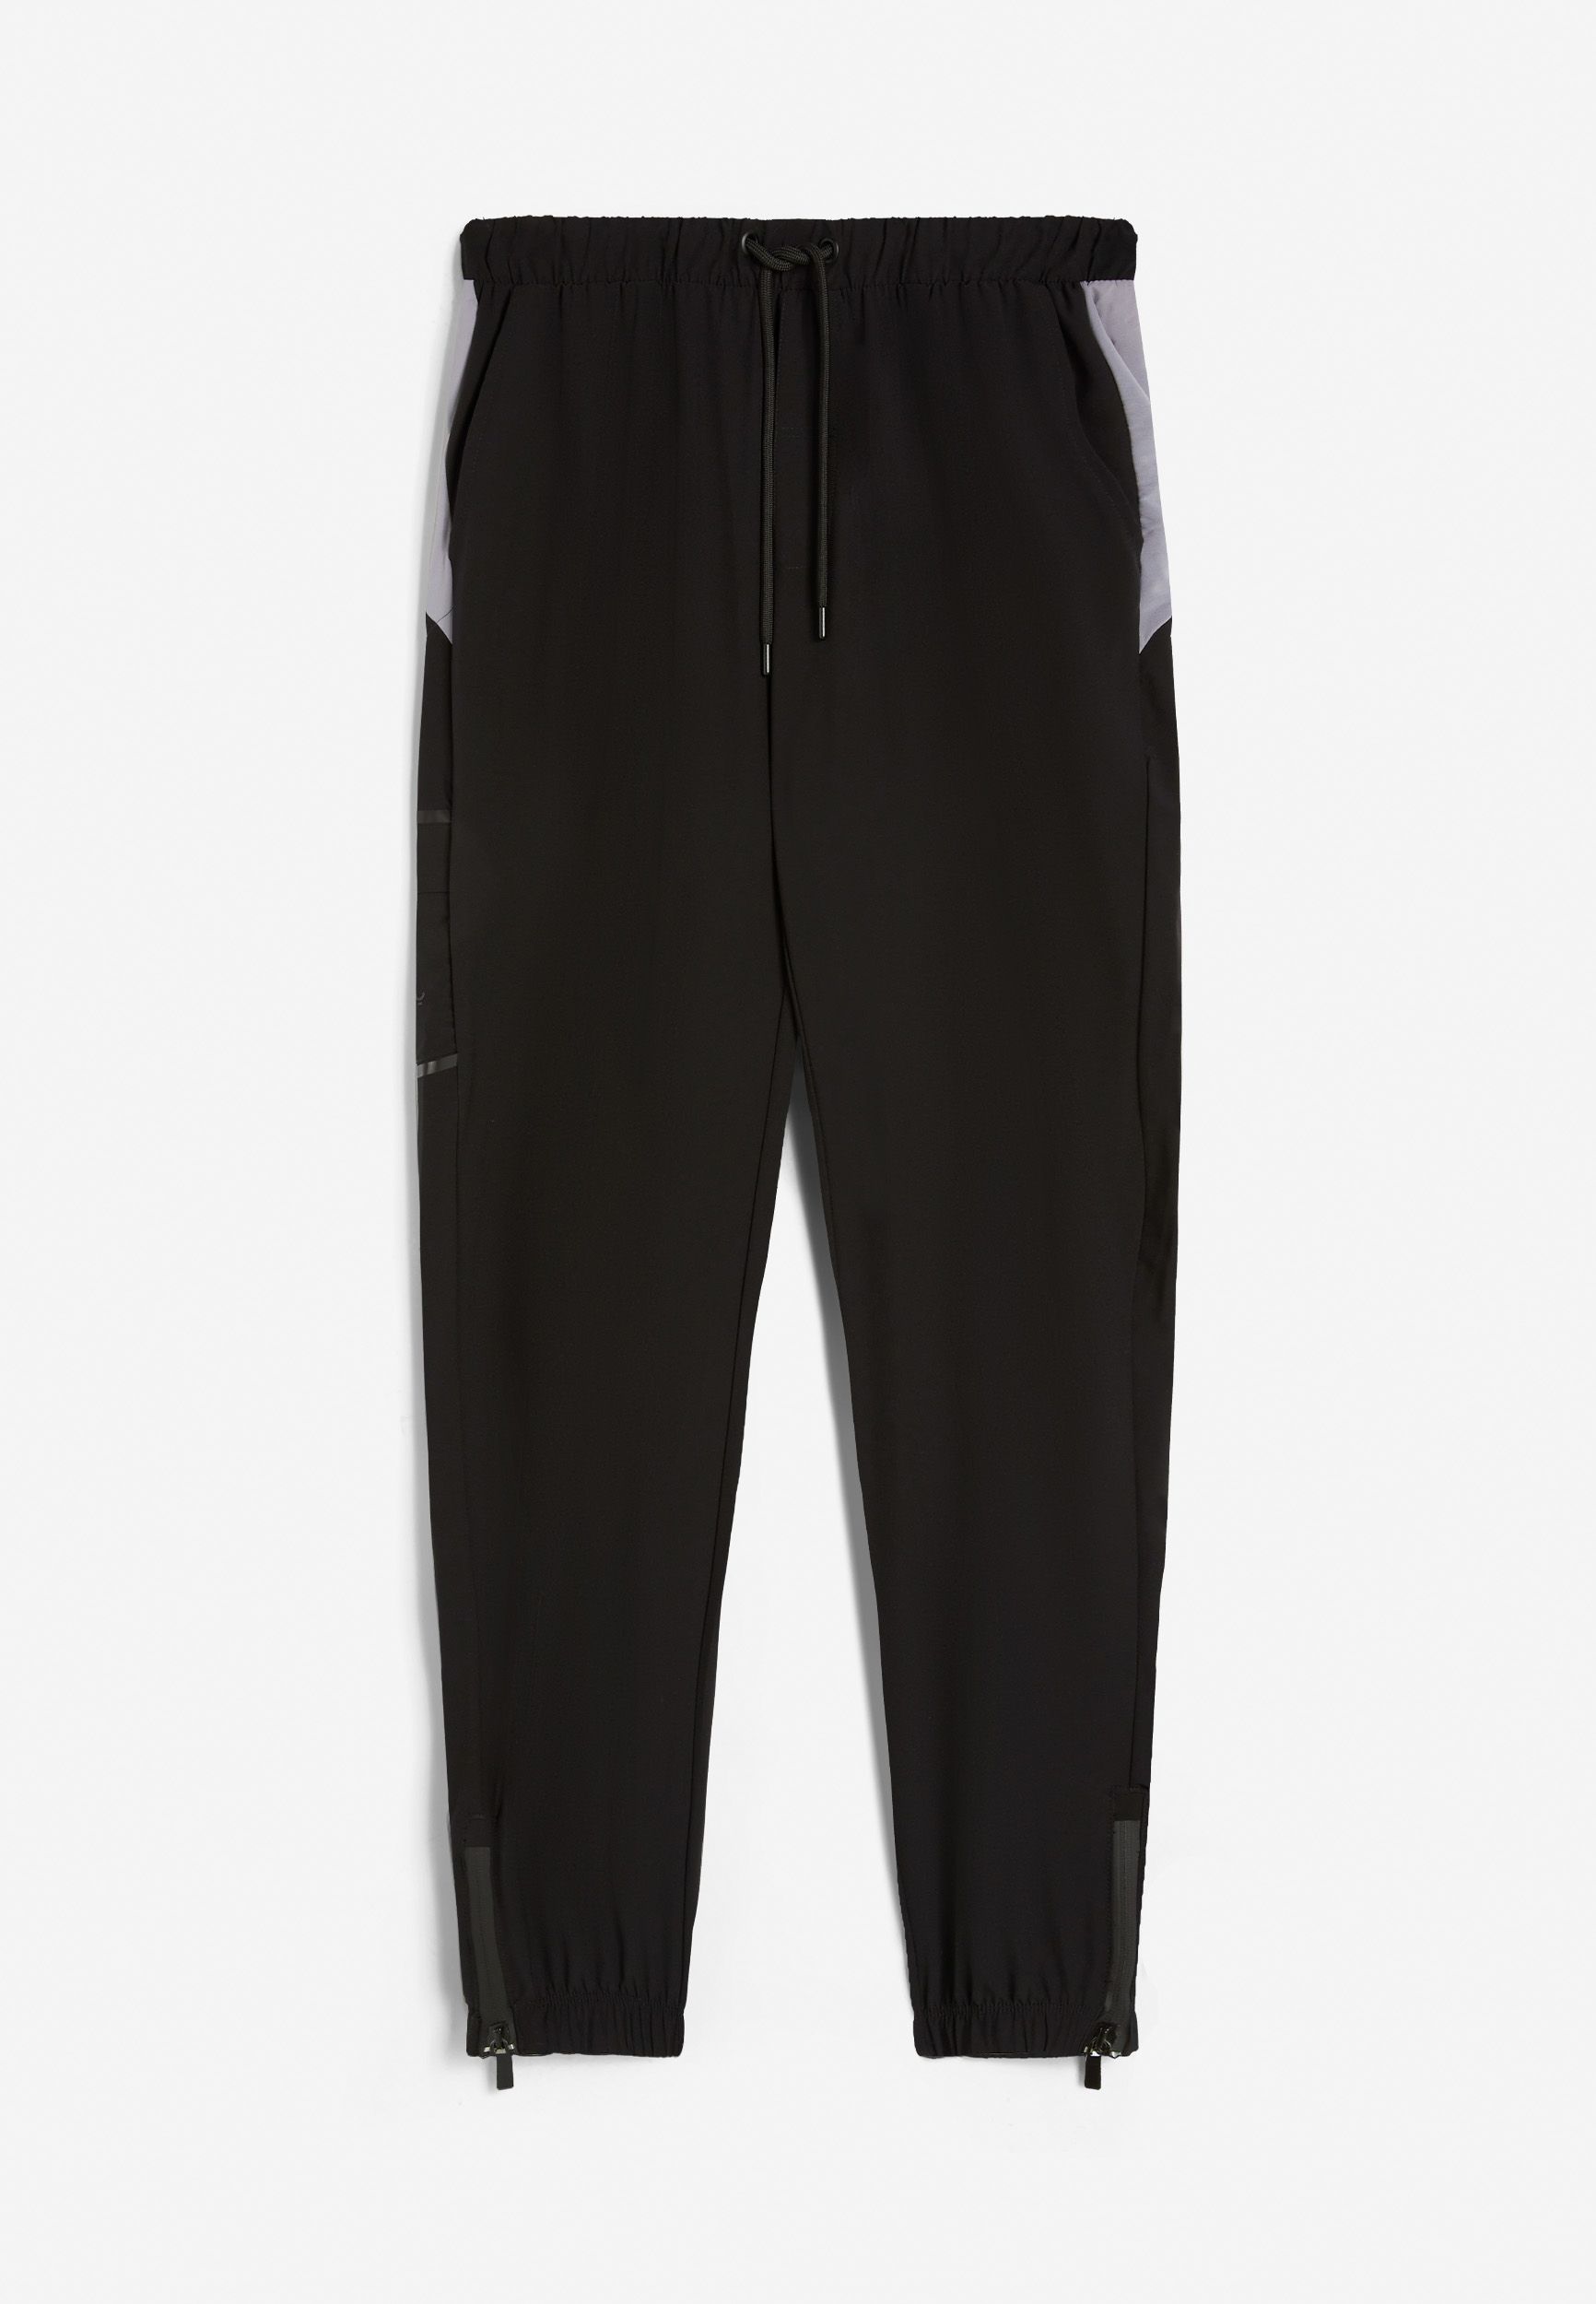 Men's trousers in polyester fabric with zip at the ankles